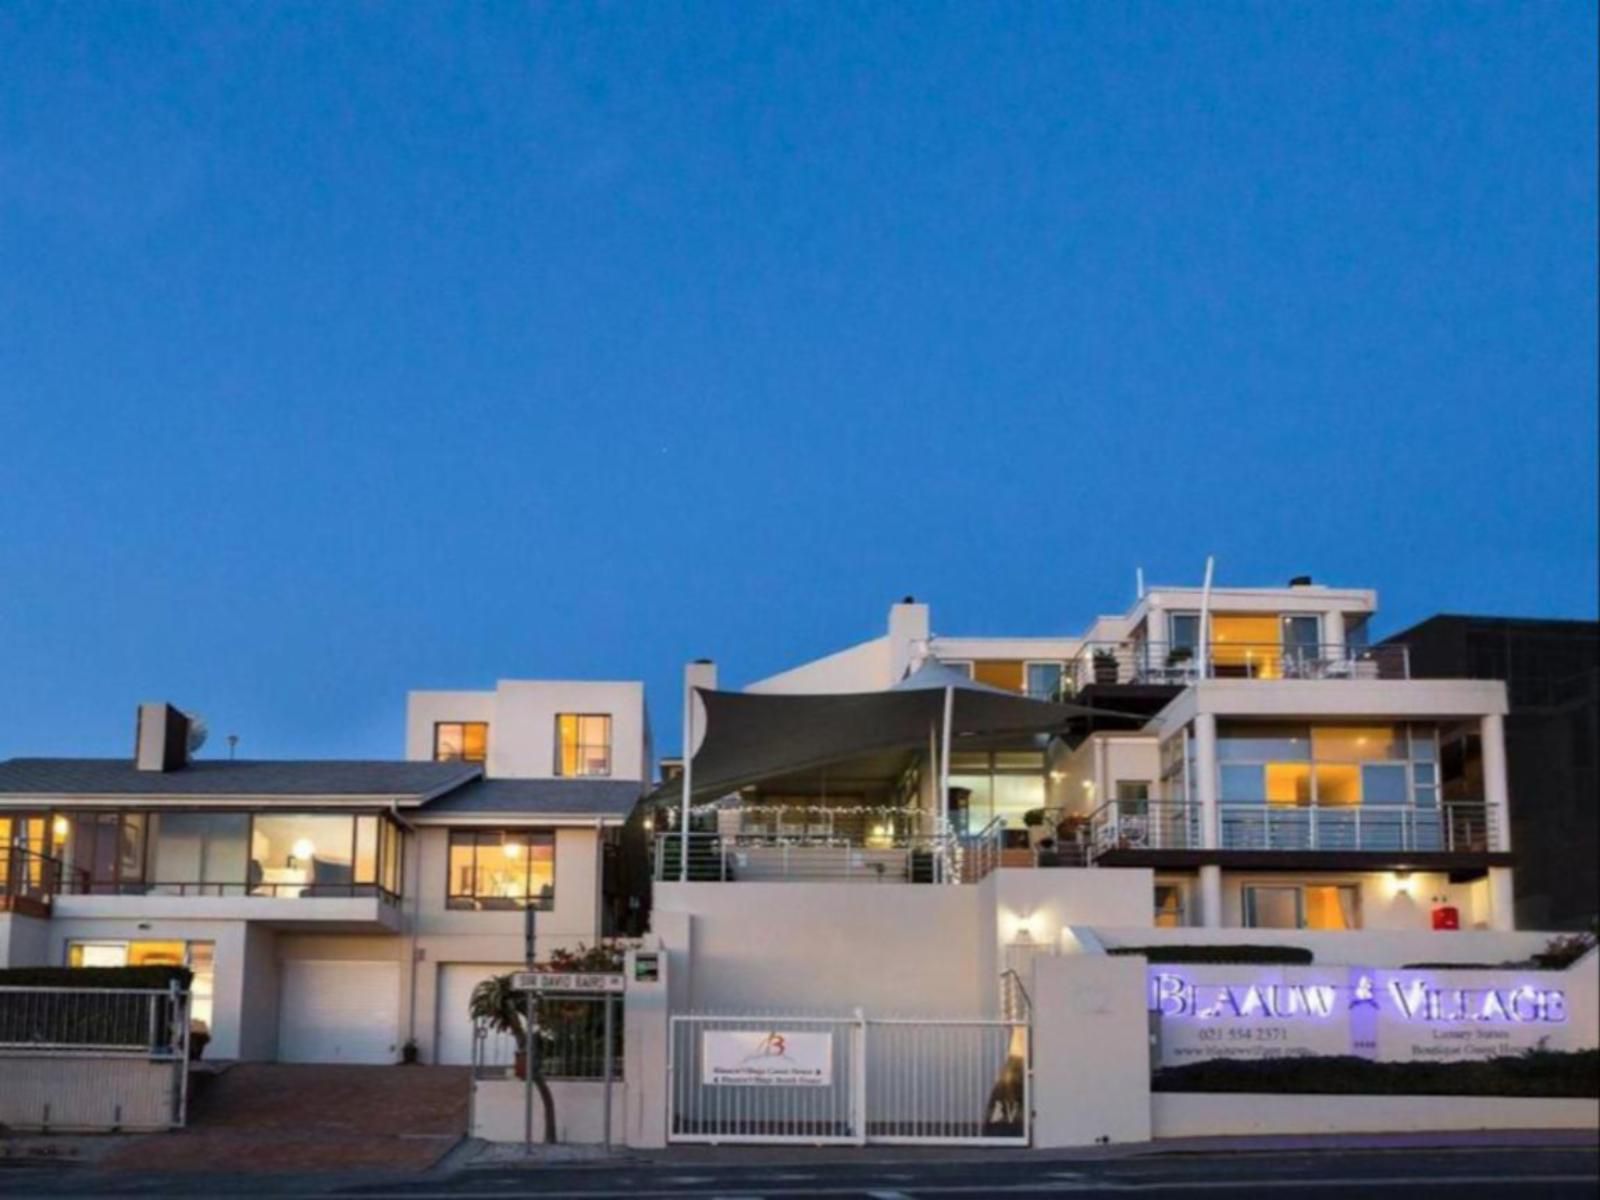 Blaauw Village Luxury Boutique Guest House Bloubergstrand Blouberg Western Cape South Africa House, Building, Architecture